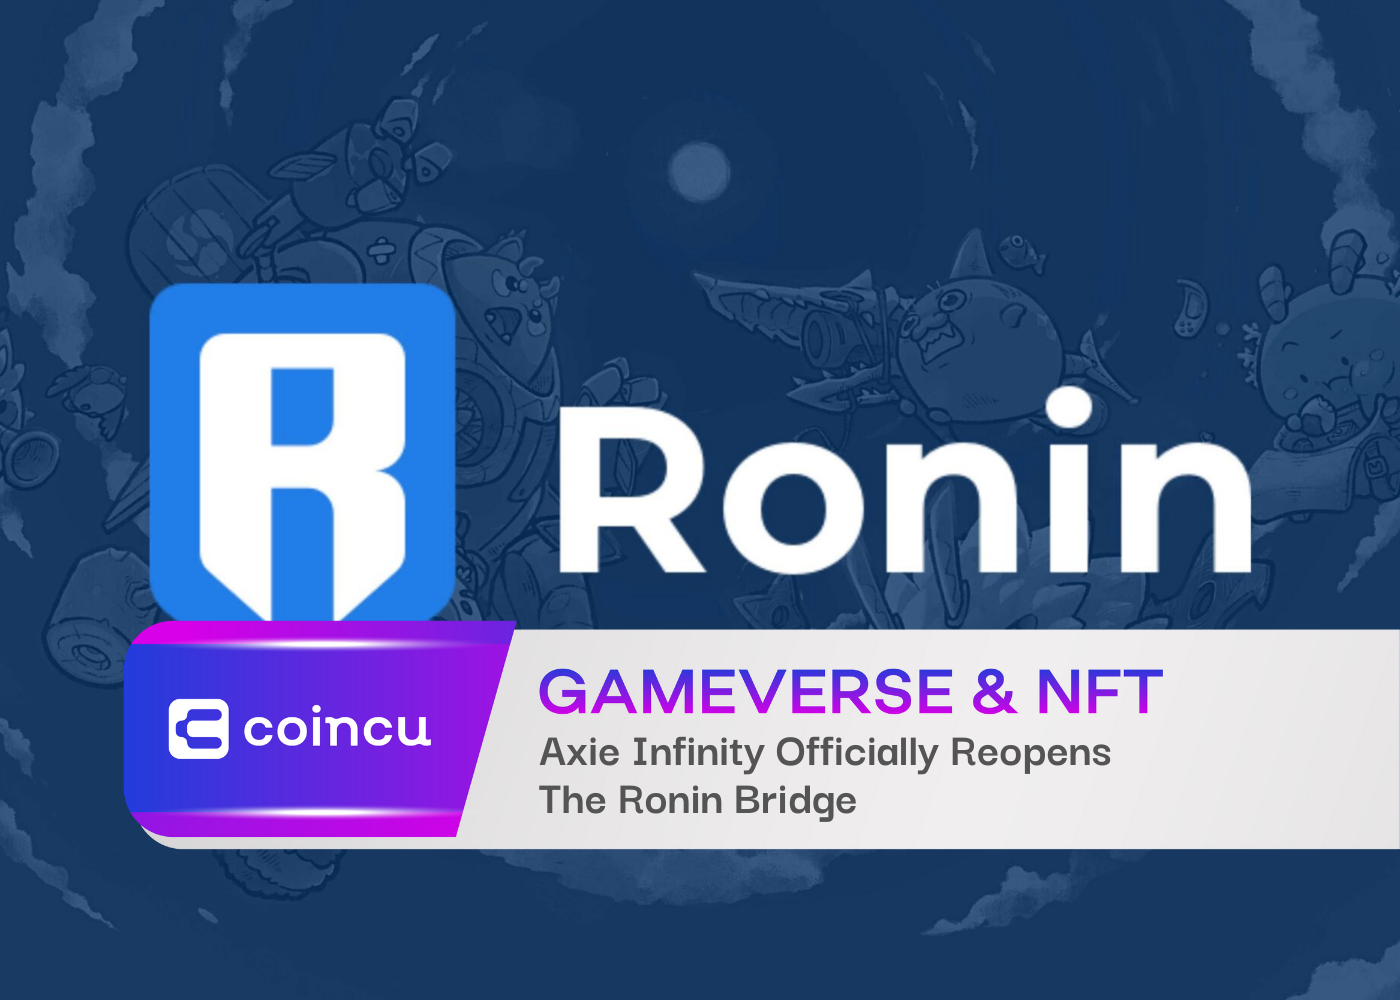 Axie Infinity Officially Reopens The Ronin Bridge